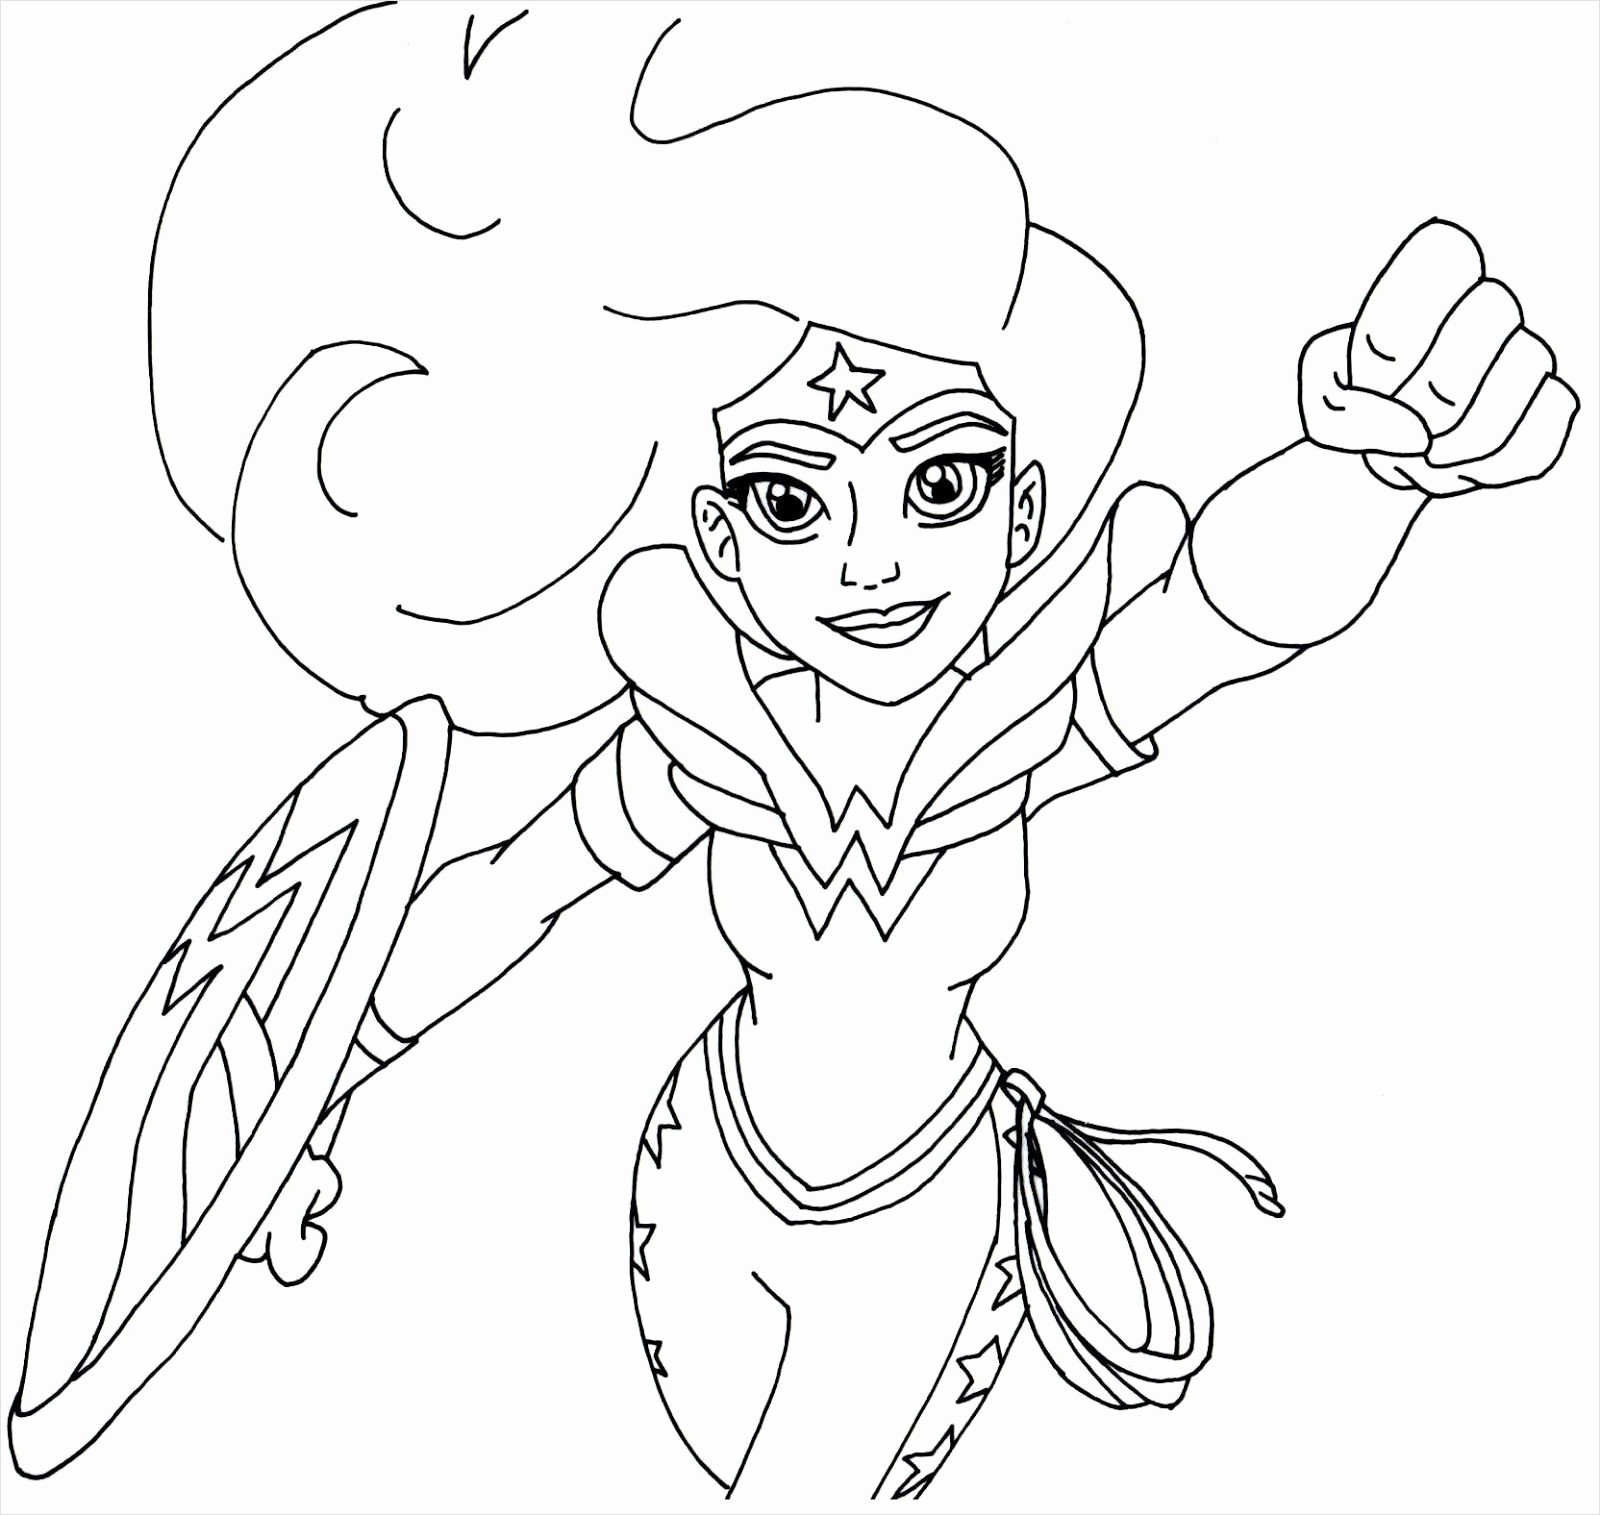 Barbie Coloring Pages Games Free Best Awesome Free Barbie Coloring Pages Best Coloring Pages For Girls